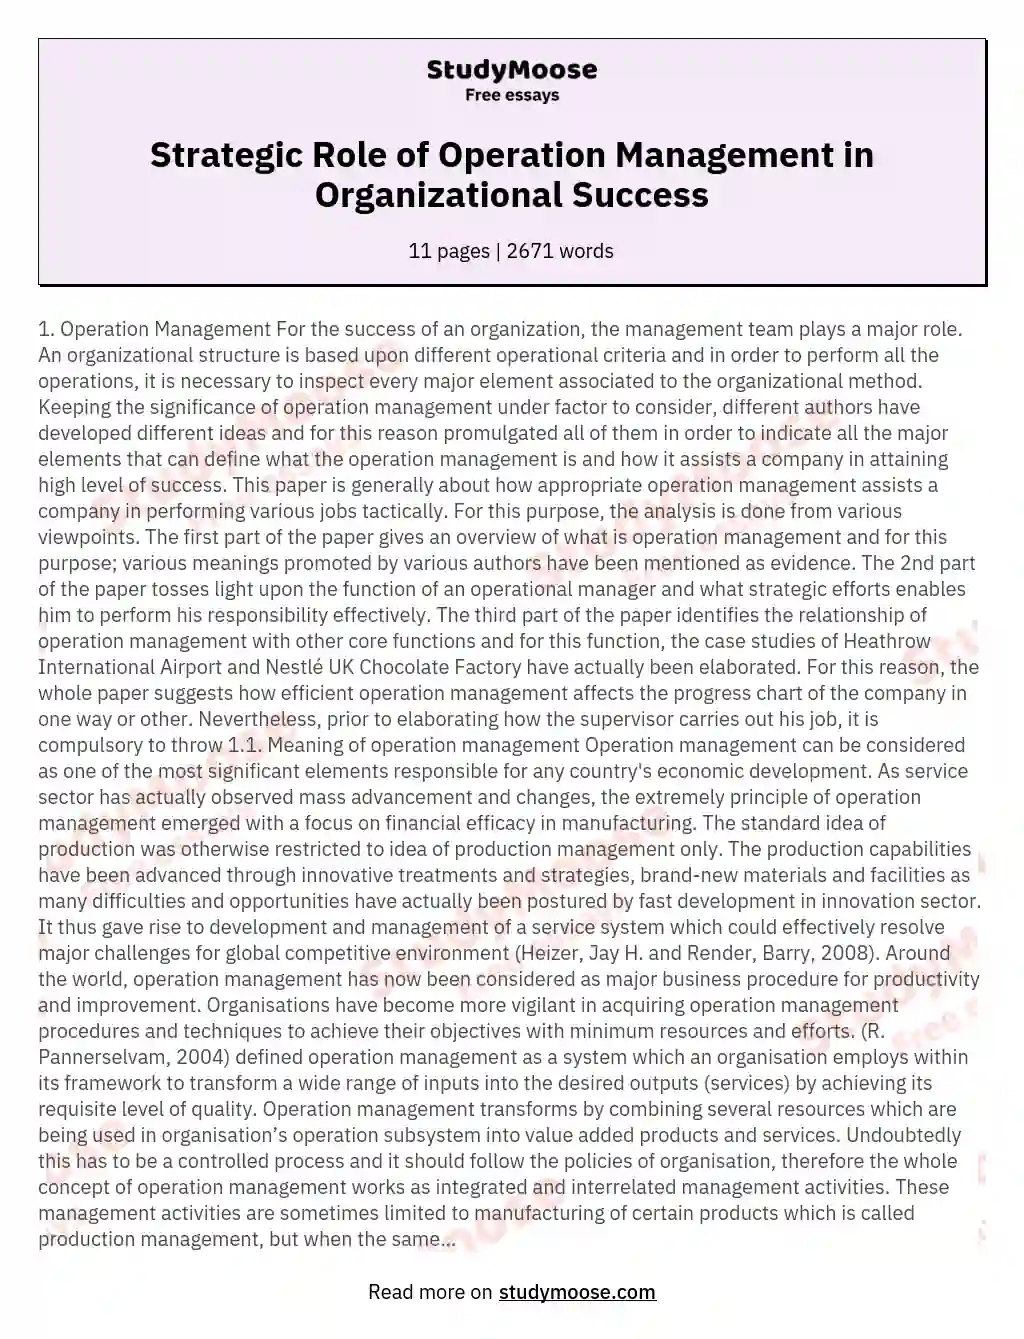 business operations essay example